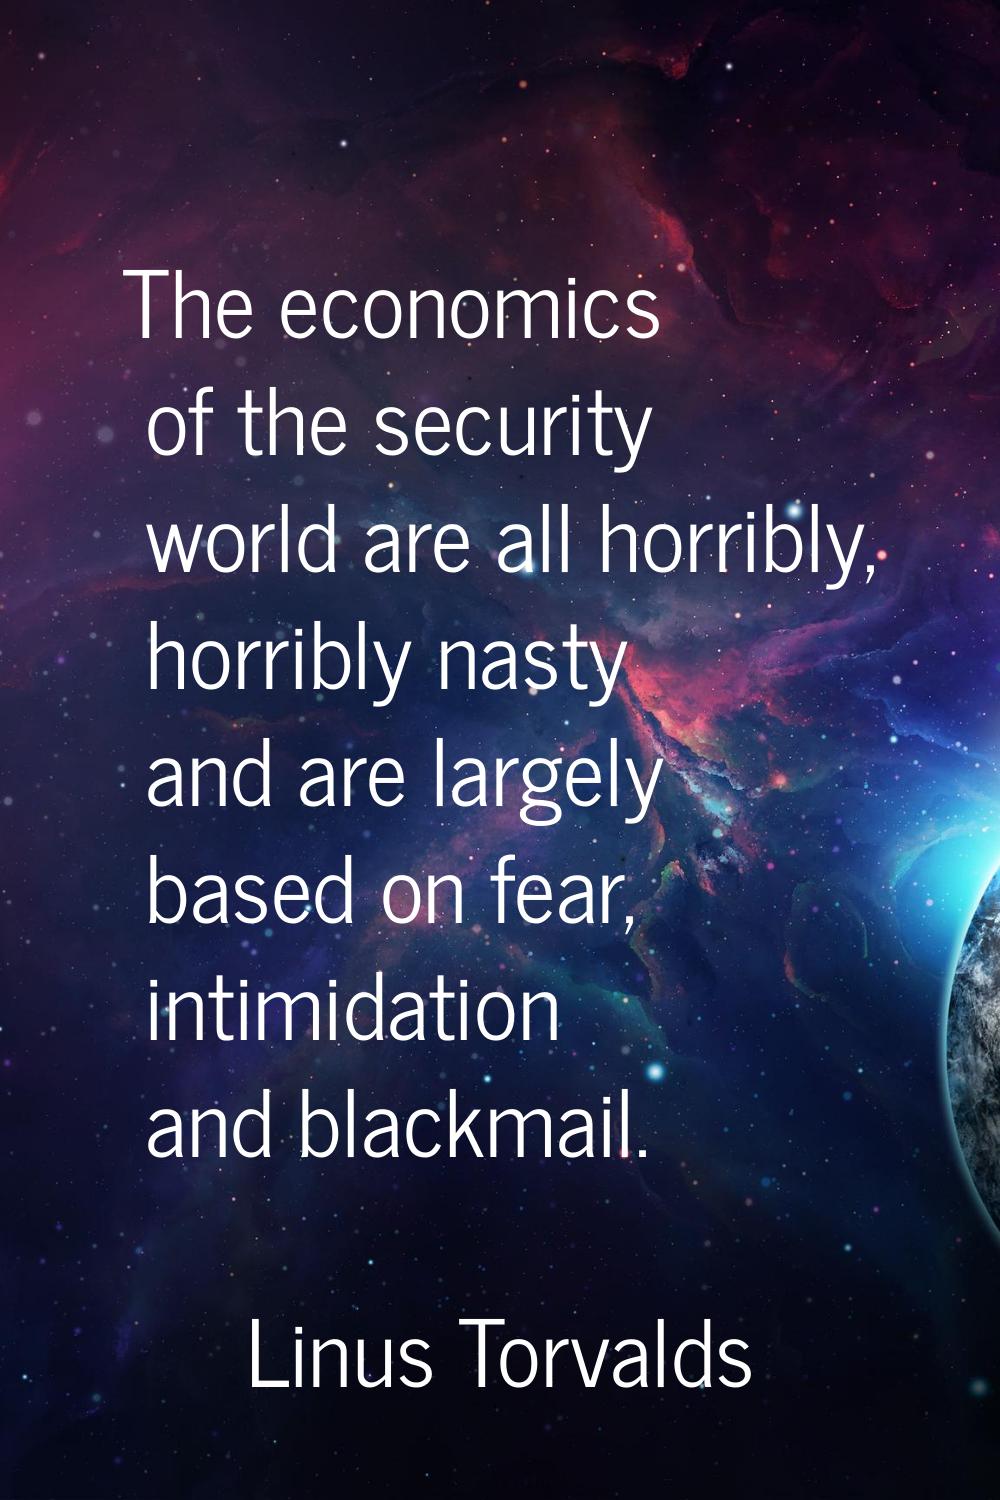 The economics of the security world are all horribly, horribly nasty and are largely based on fear,